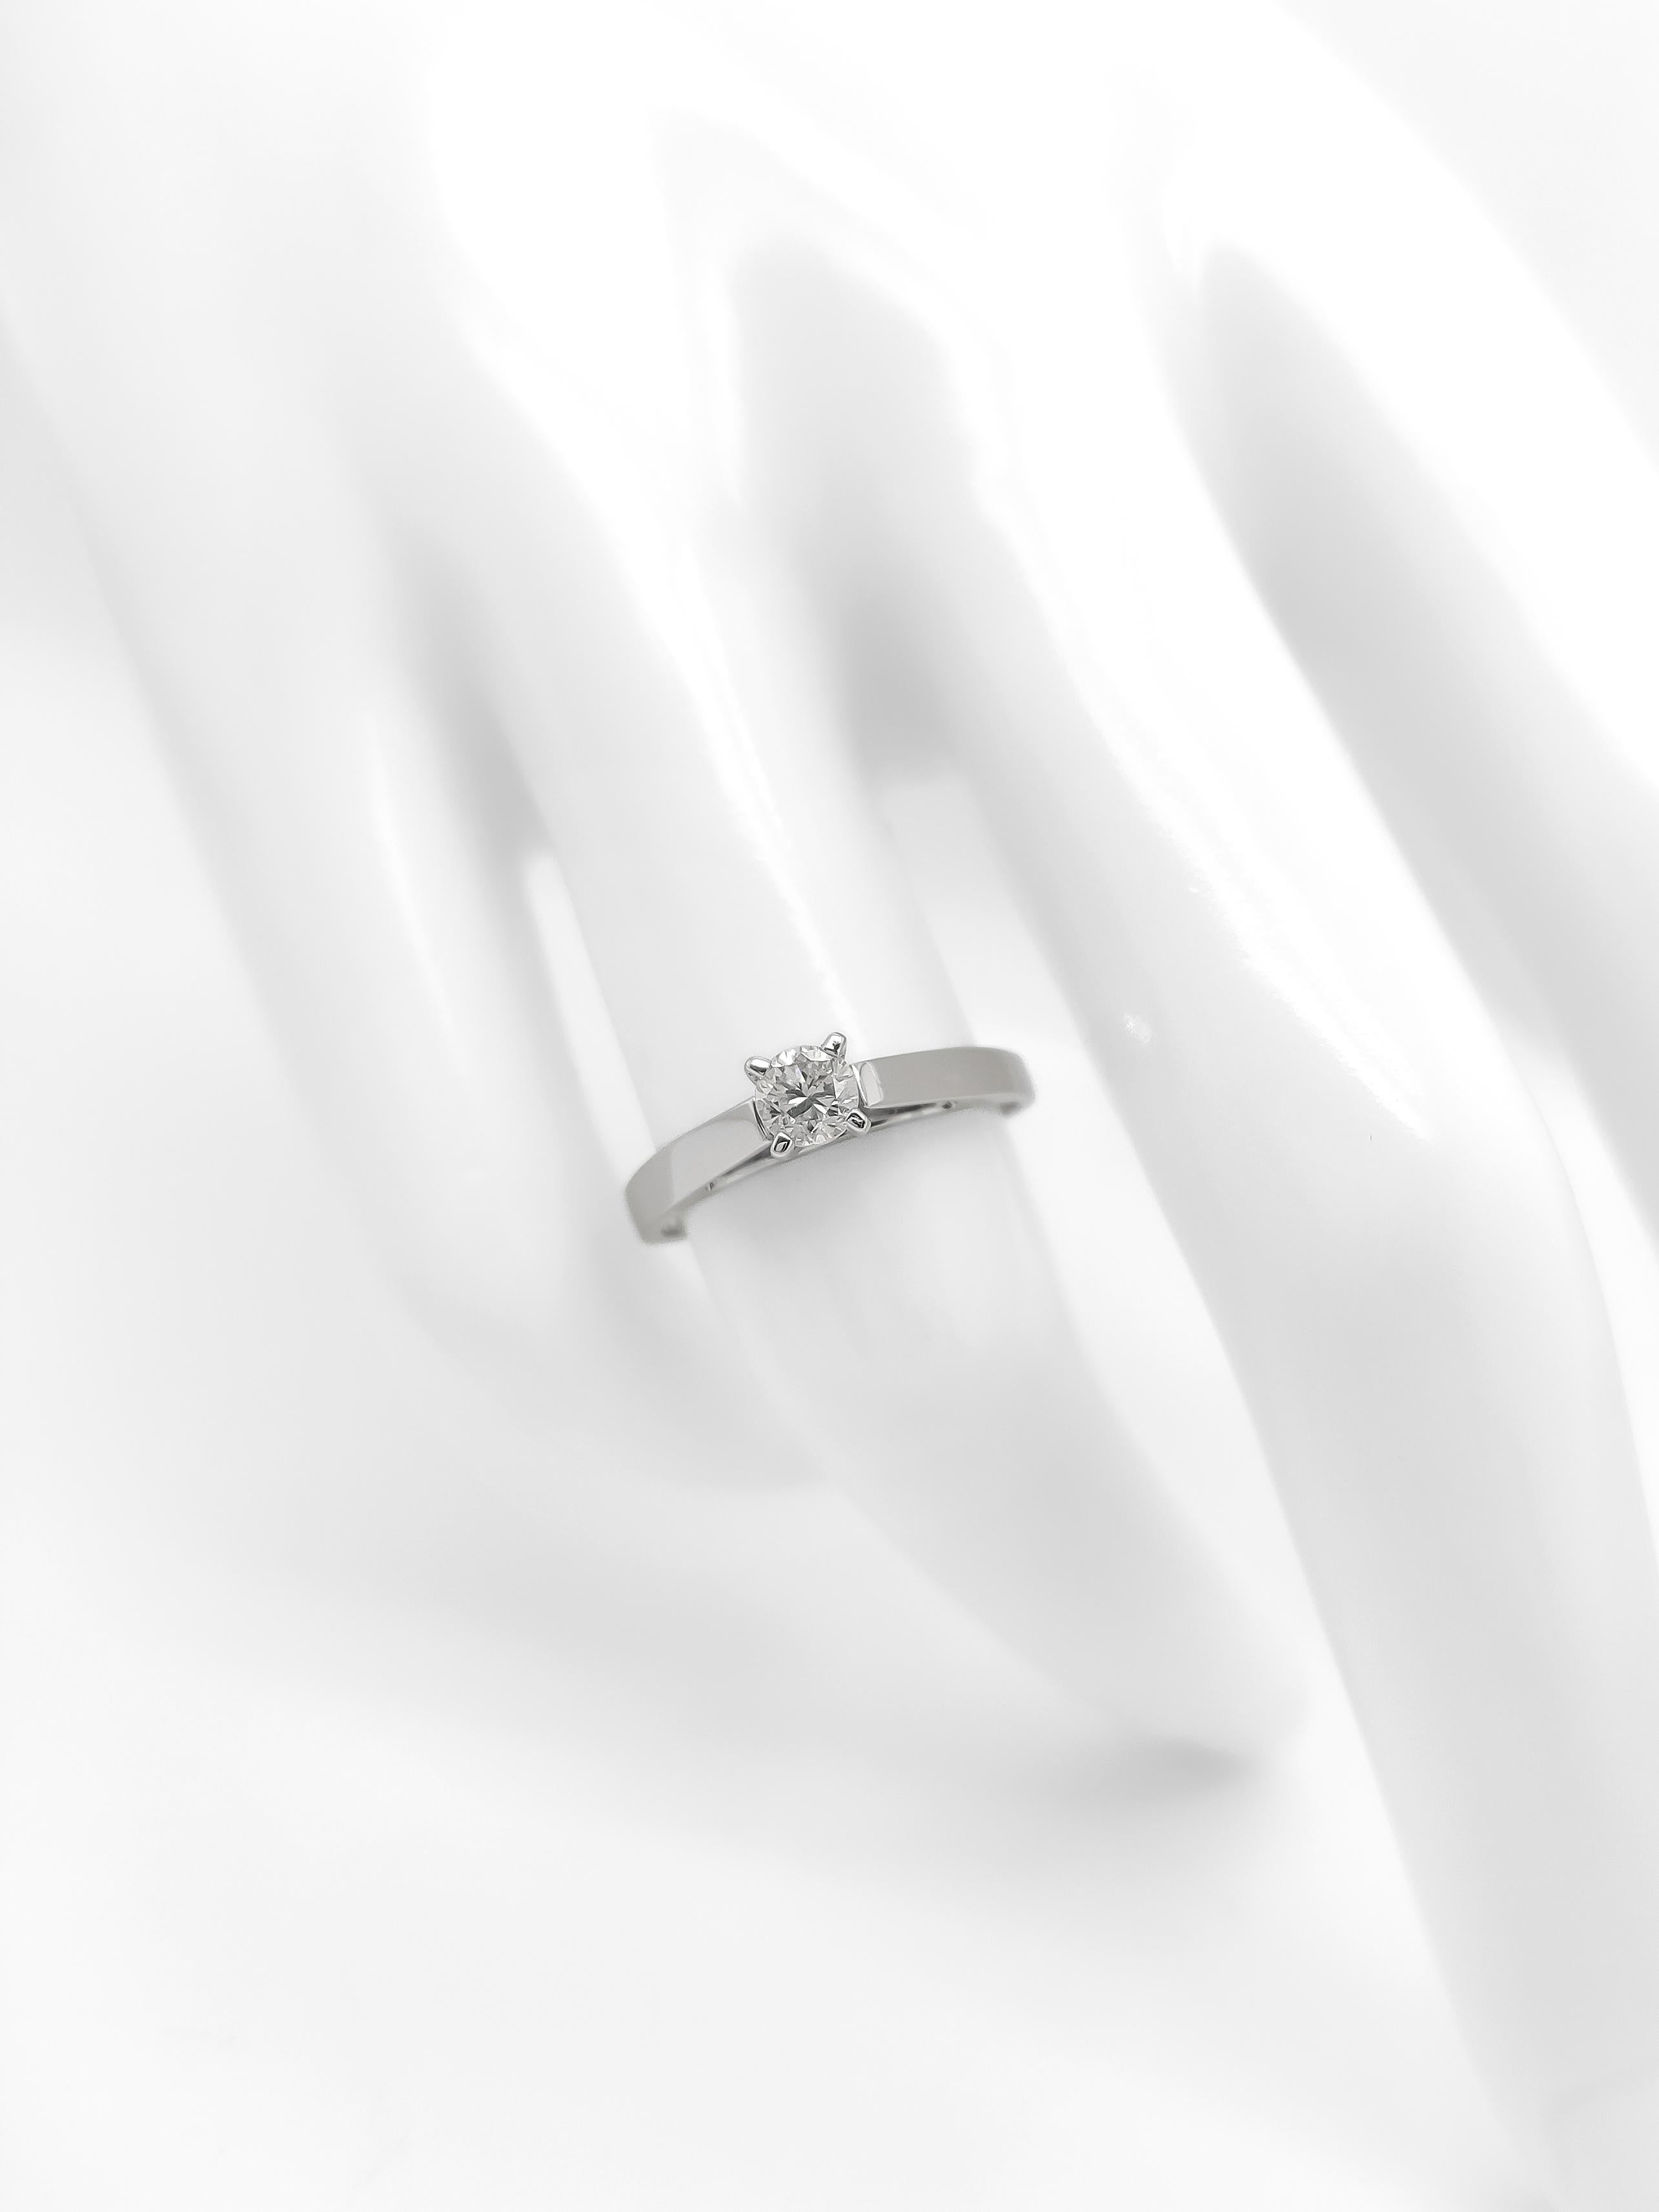 Round Cut NO RESERVE 0.26CT Round Diamond Solitaire Engagement Ring 14K White Gold For Sale